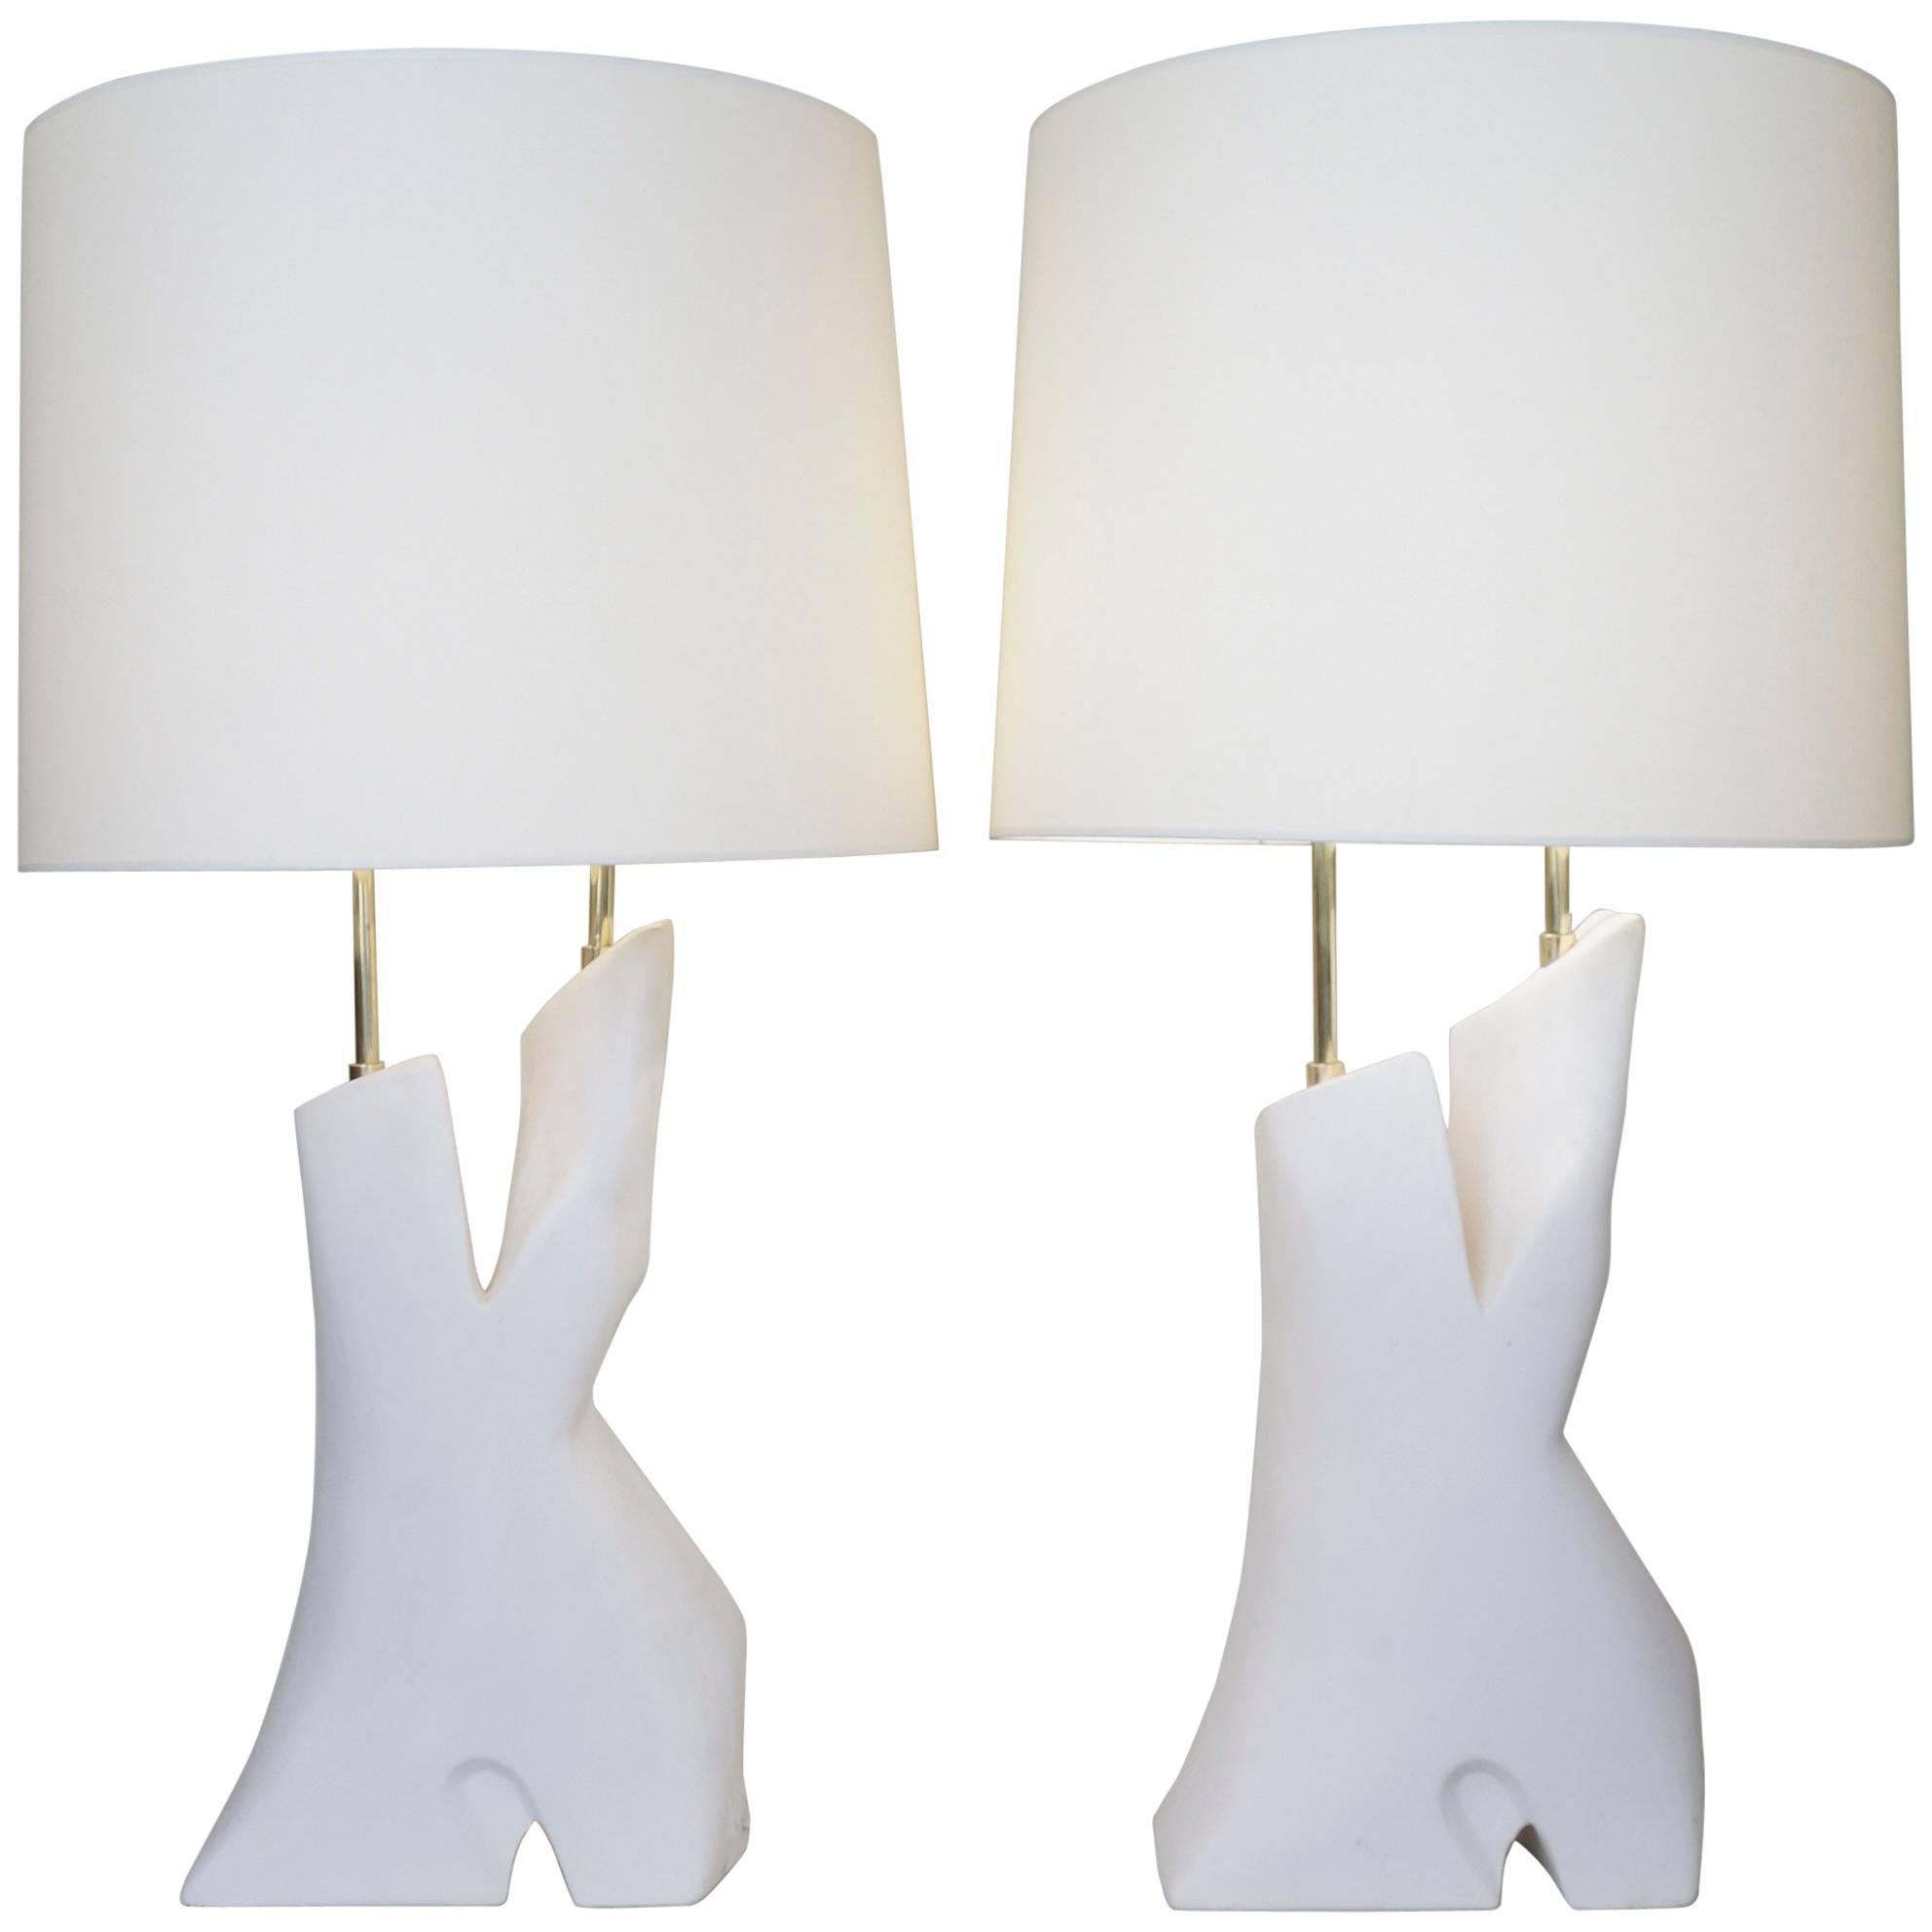 Late 20th Century Pair of White Un-Enameled Ceramic Table Lamp by Dorion For Sale